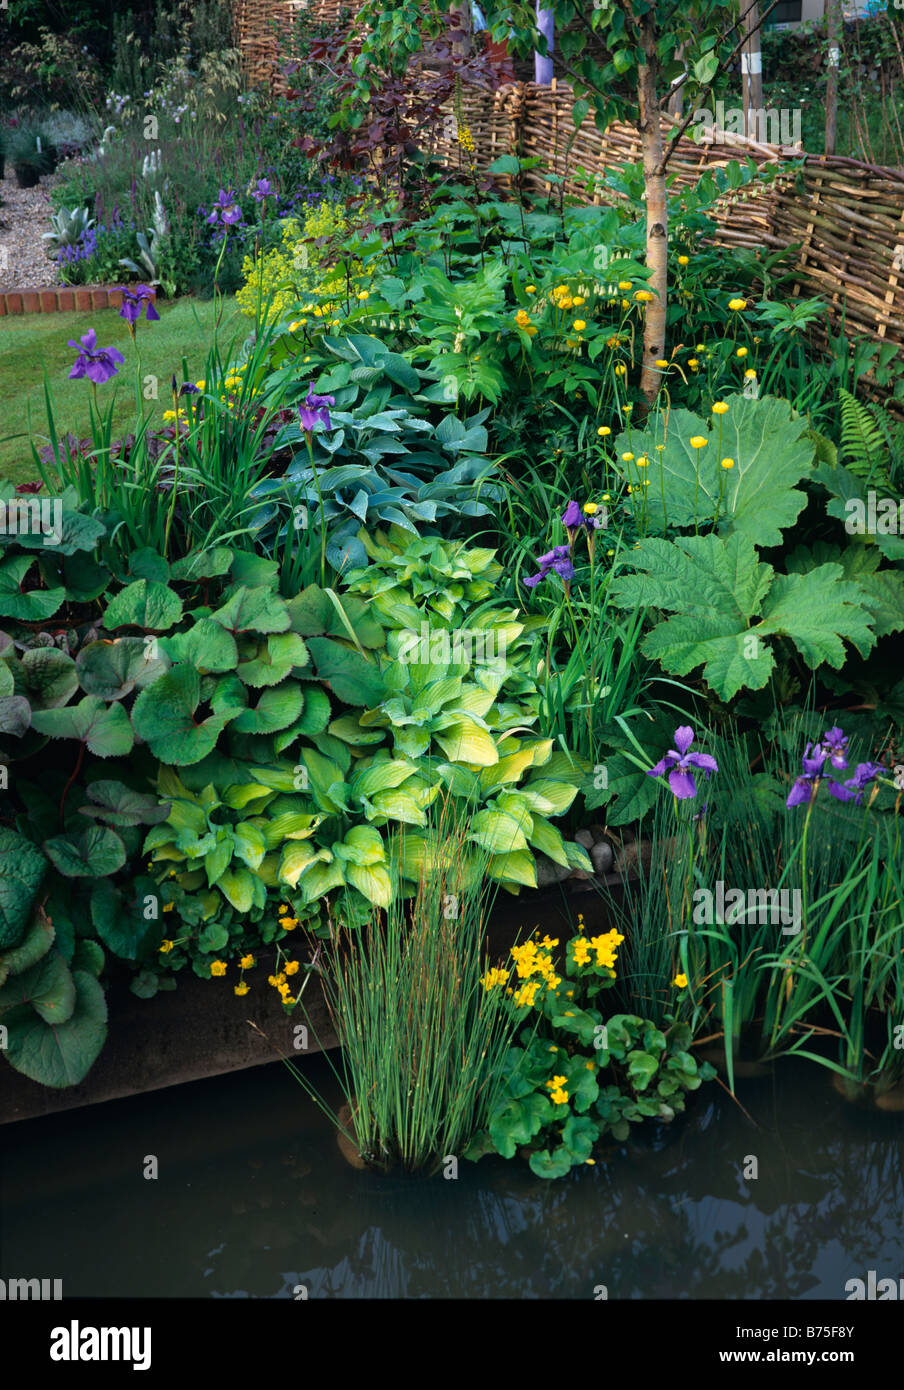 A garden flower border with water plants in a pool Stock Photo